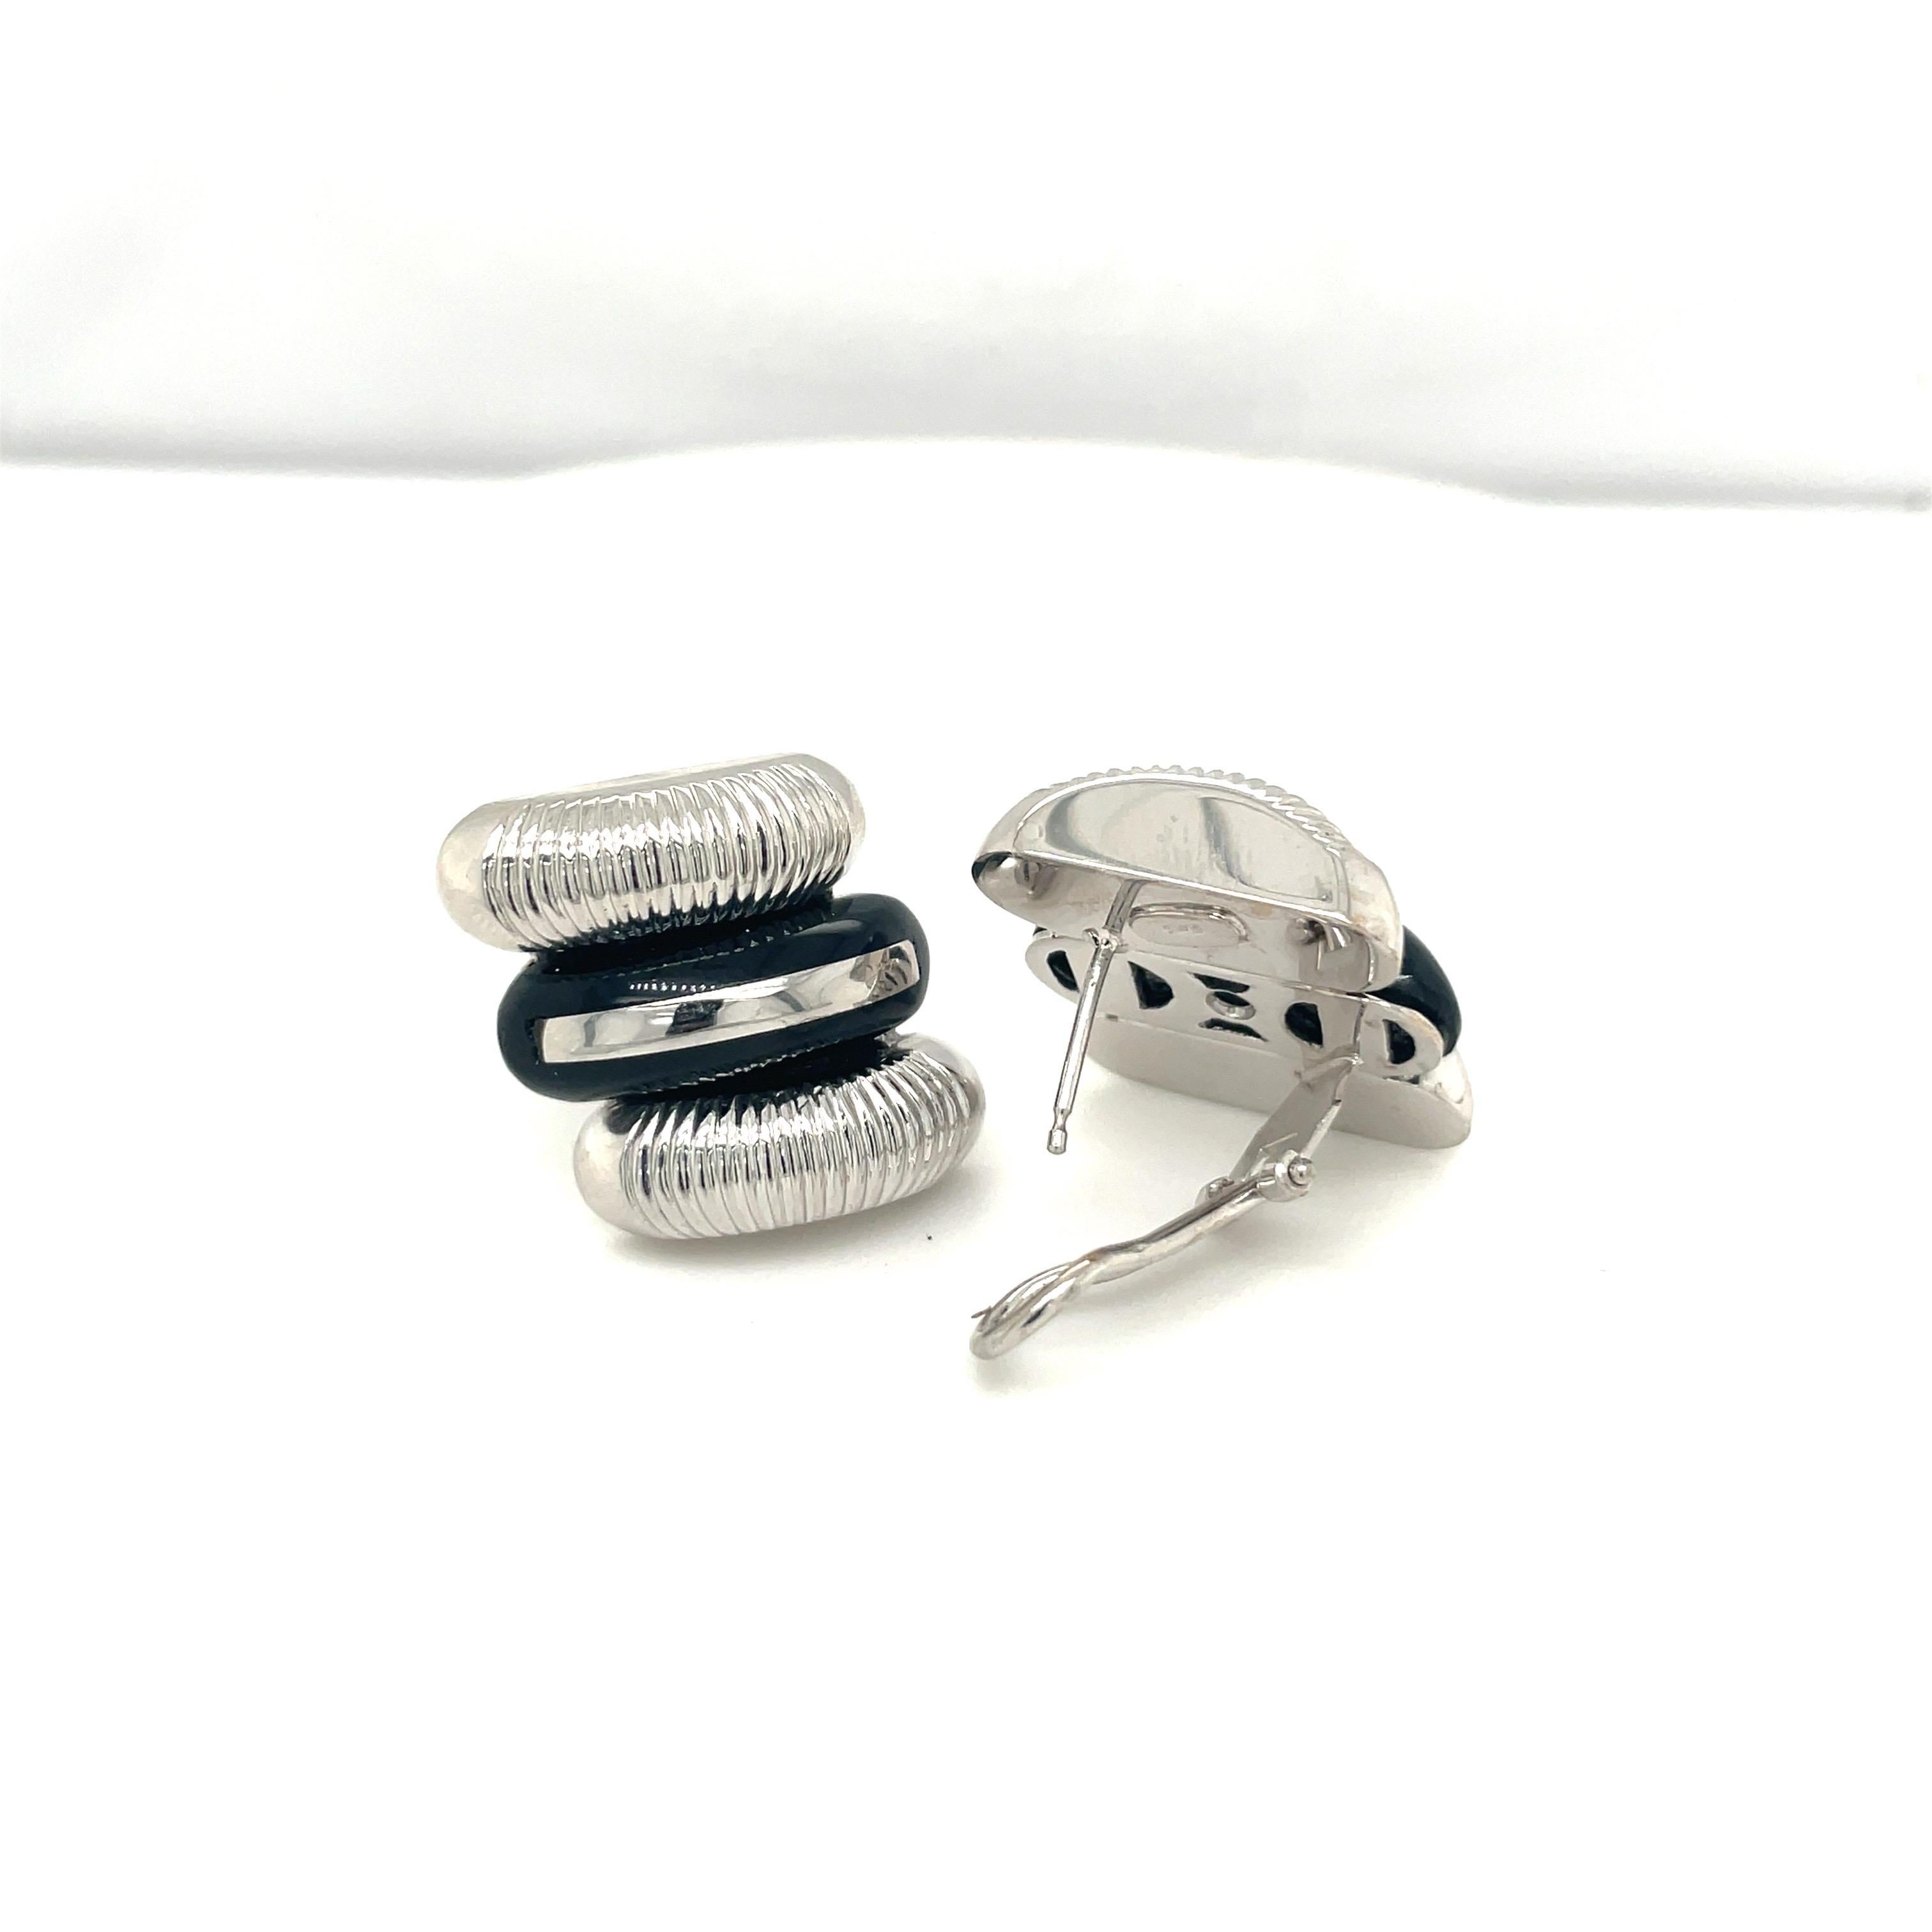 A very classic pair of 18 karat white gold earrings. The earrings are designed with 2 ribbed sections of on either end, and a black onyx section in the center. The earrings are pierced and can be adjusted to clip on. They measure approximately